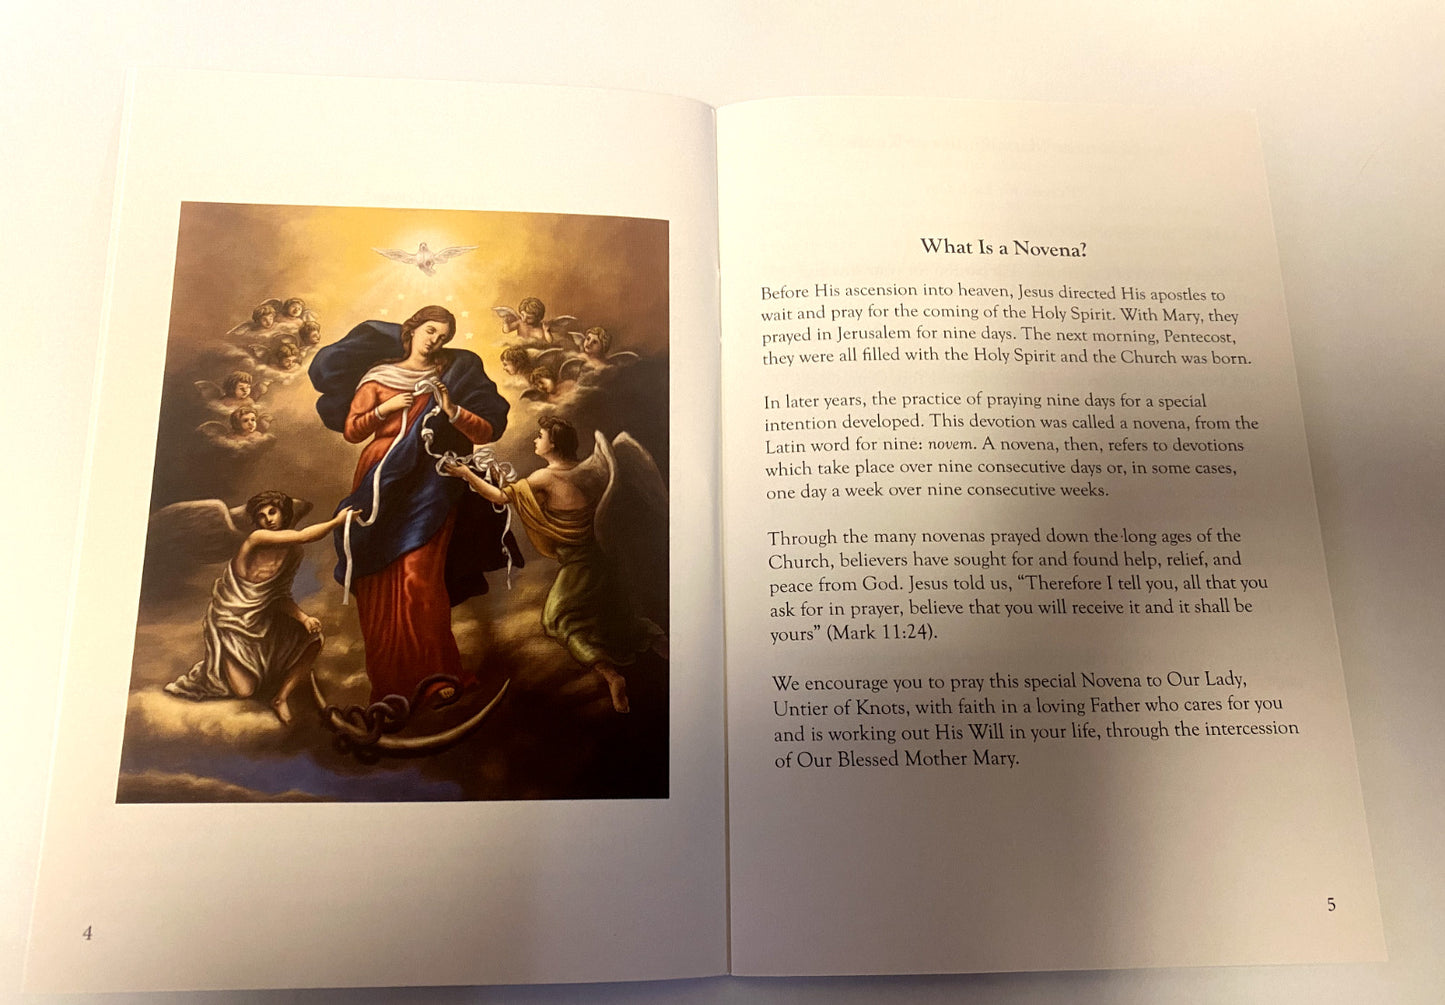 Our Lady Undoer (Untier) of Knots Prayer Book, New - Bob and Penny Lord